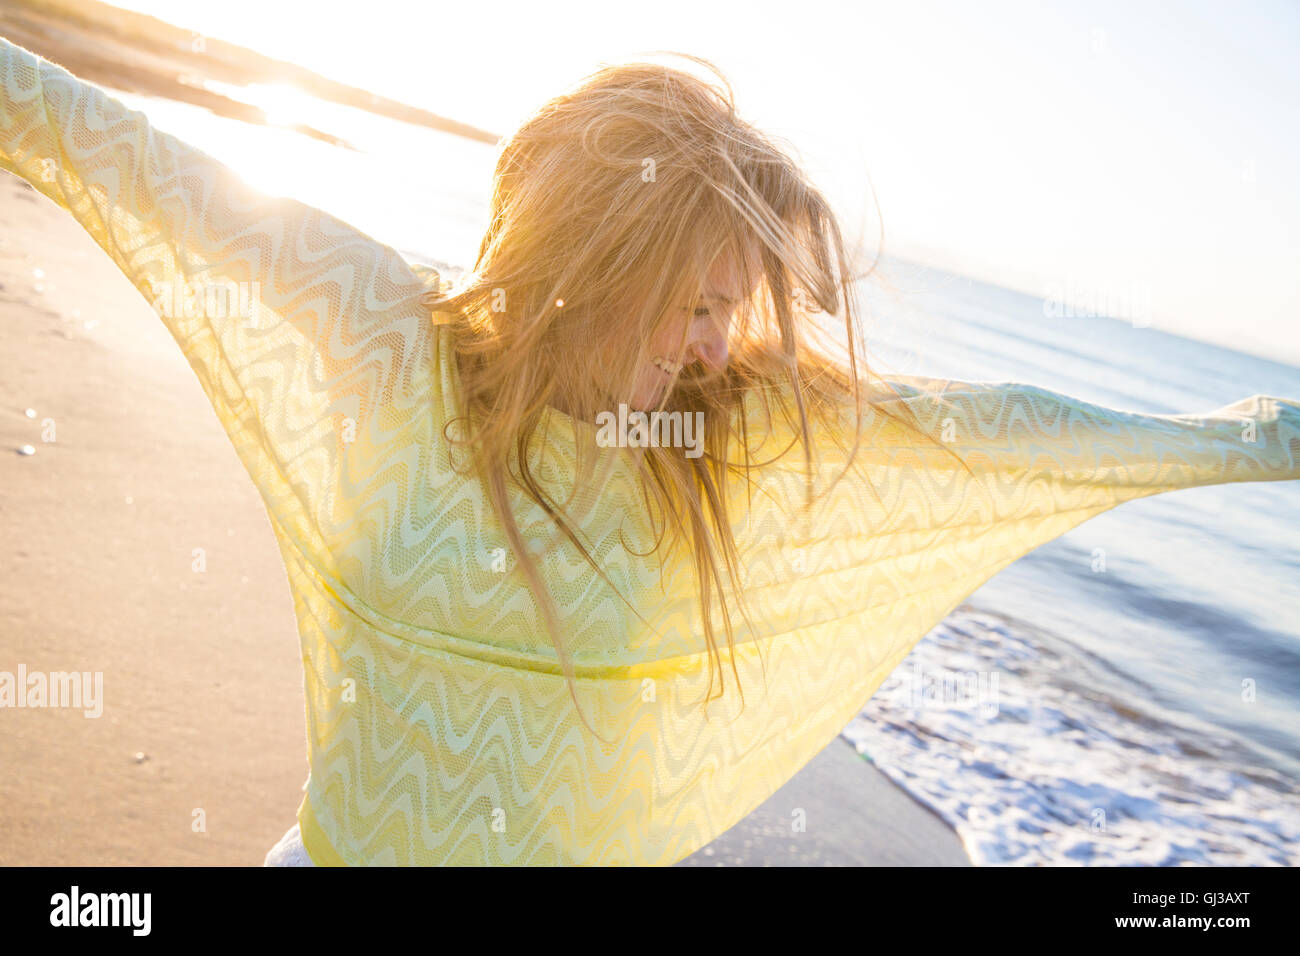 Young woman on beach, danse, smiling Banque D'Images